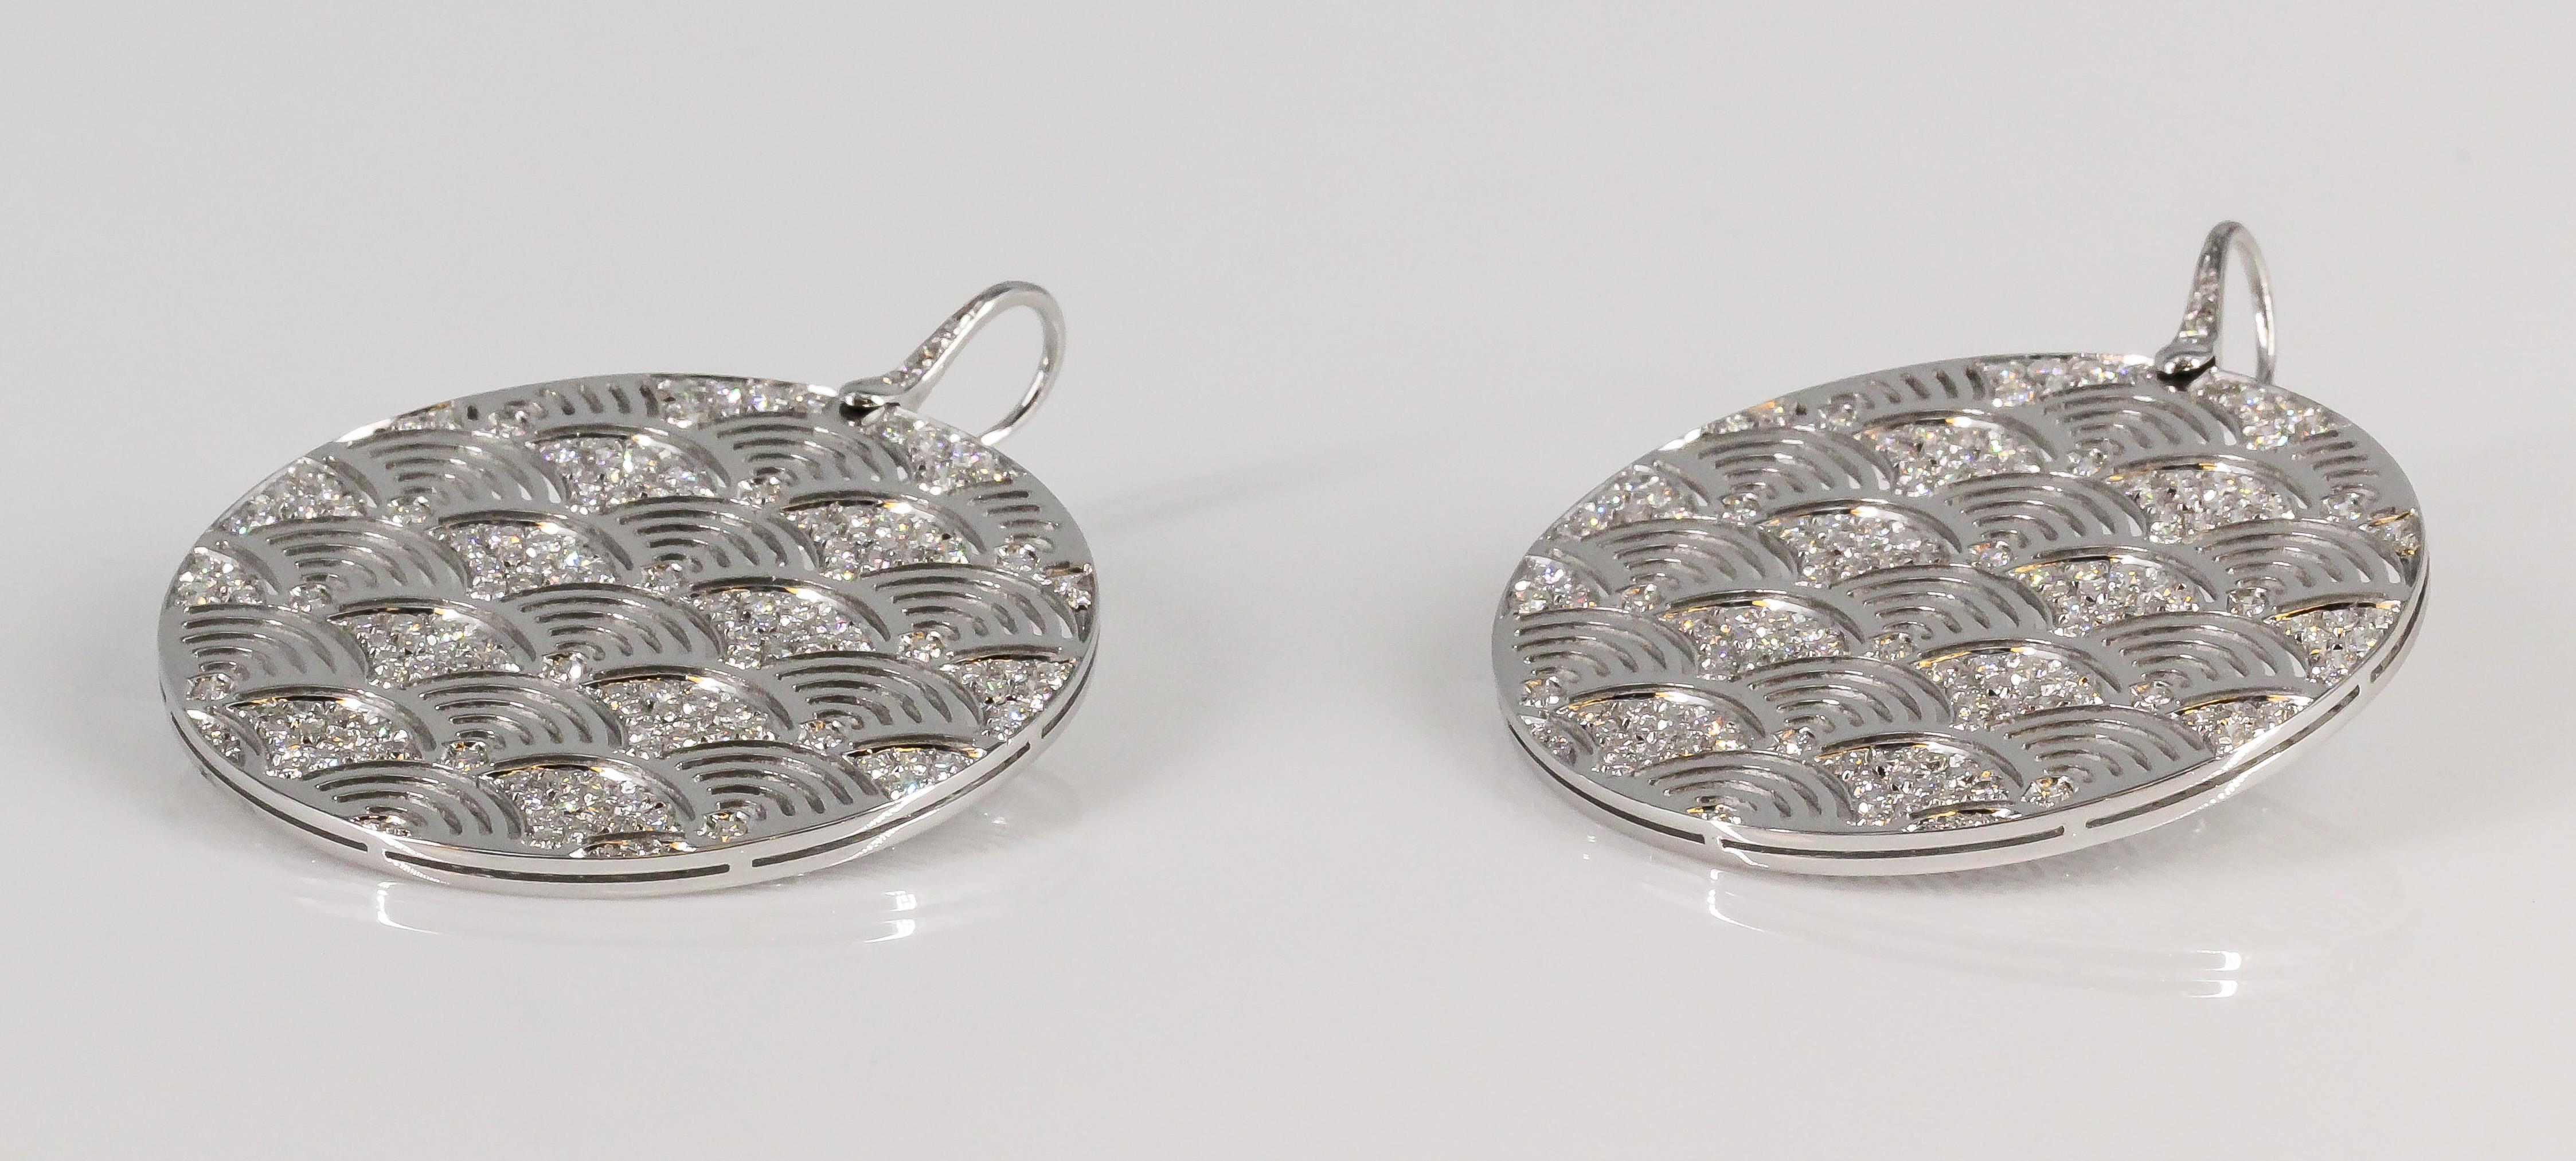 Fine pair of diamond and 18K white gold drop earrings by Enigma, Gianni Bulgari. Designed as hanging circular discs, these earrings are a stunning piece of jewelry that embodies elegance and sophistication. 

The earrings are made of 18k white gold,